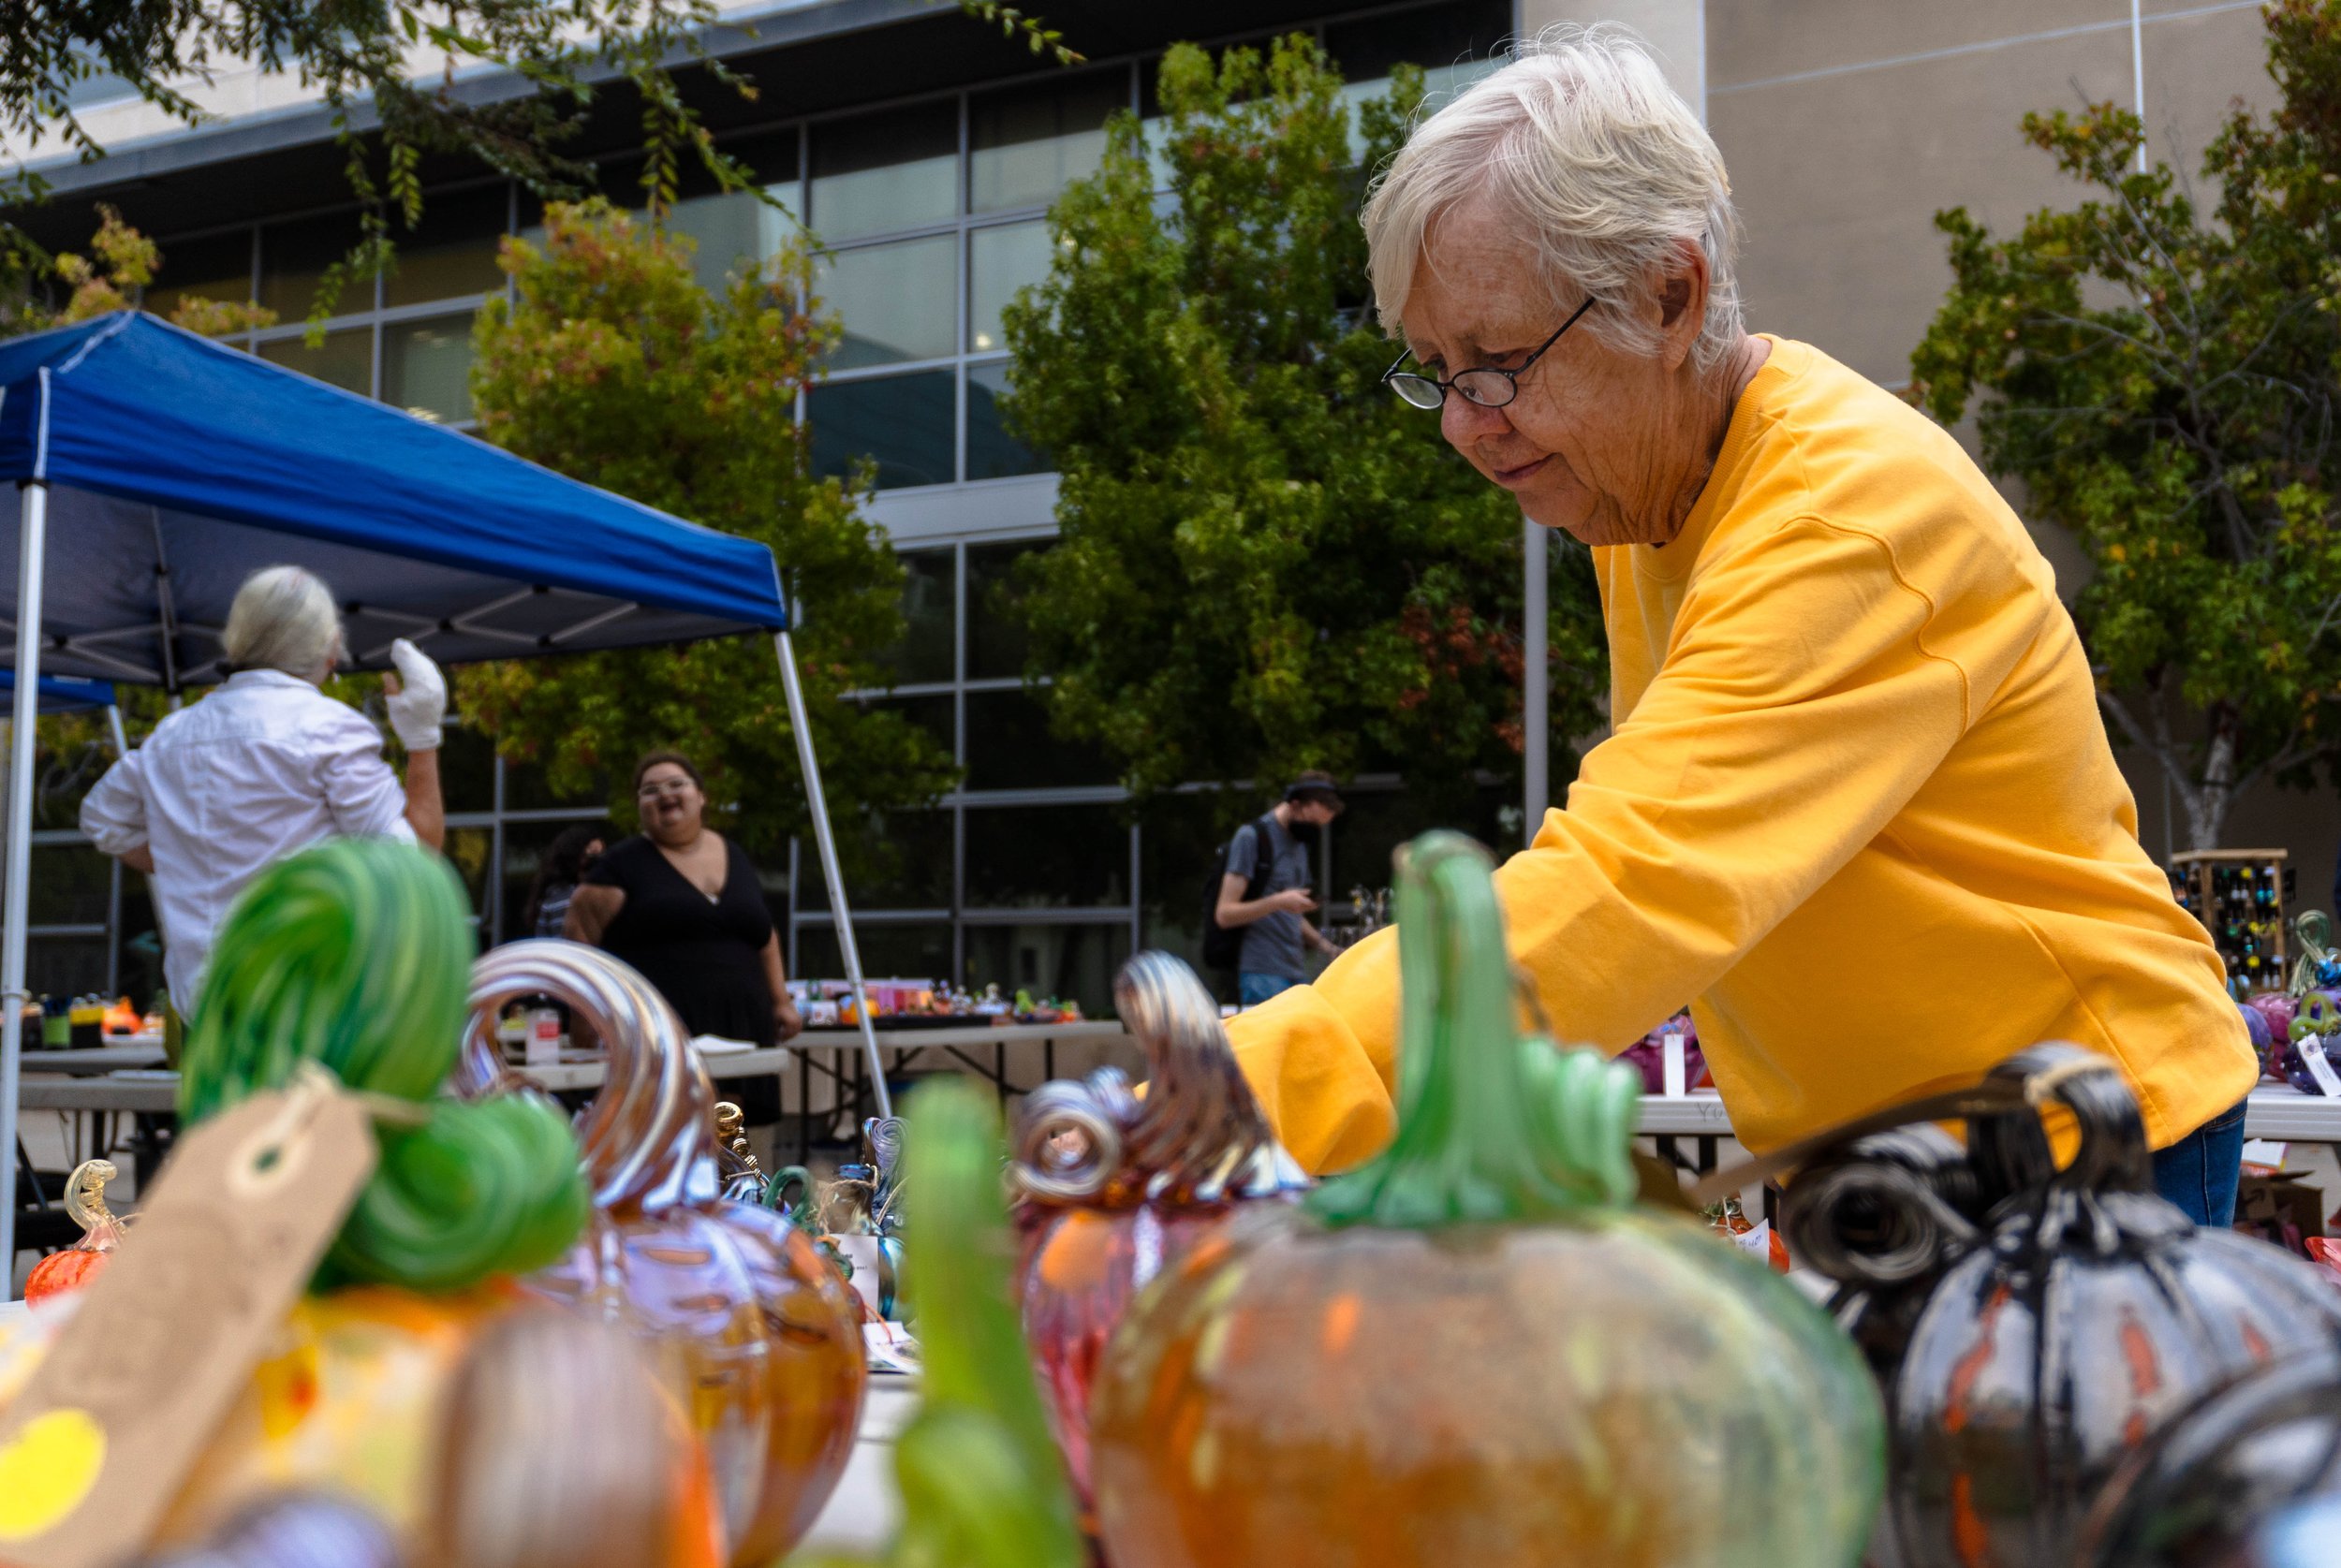  Santa Monica resident Linn Wile walked from her home to the Santa Monica College (SMC) campus for the SMC Art Department's annual Glass Pumpkin Sales. "It's beautiful, I wish the sun was shining and it would be even prettier." 30% of sales earned wi